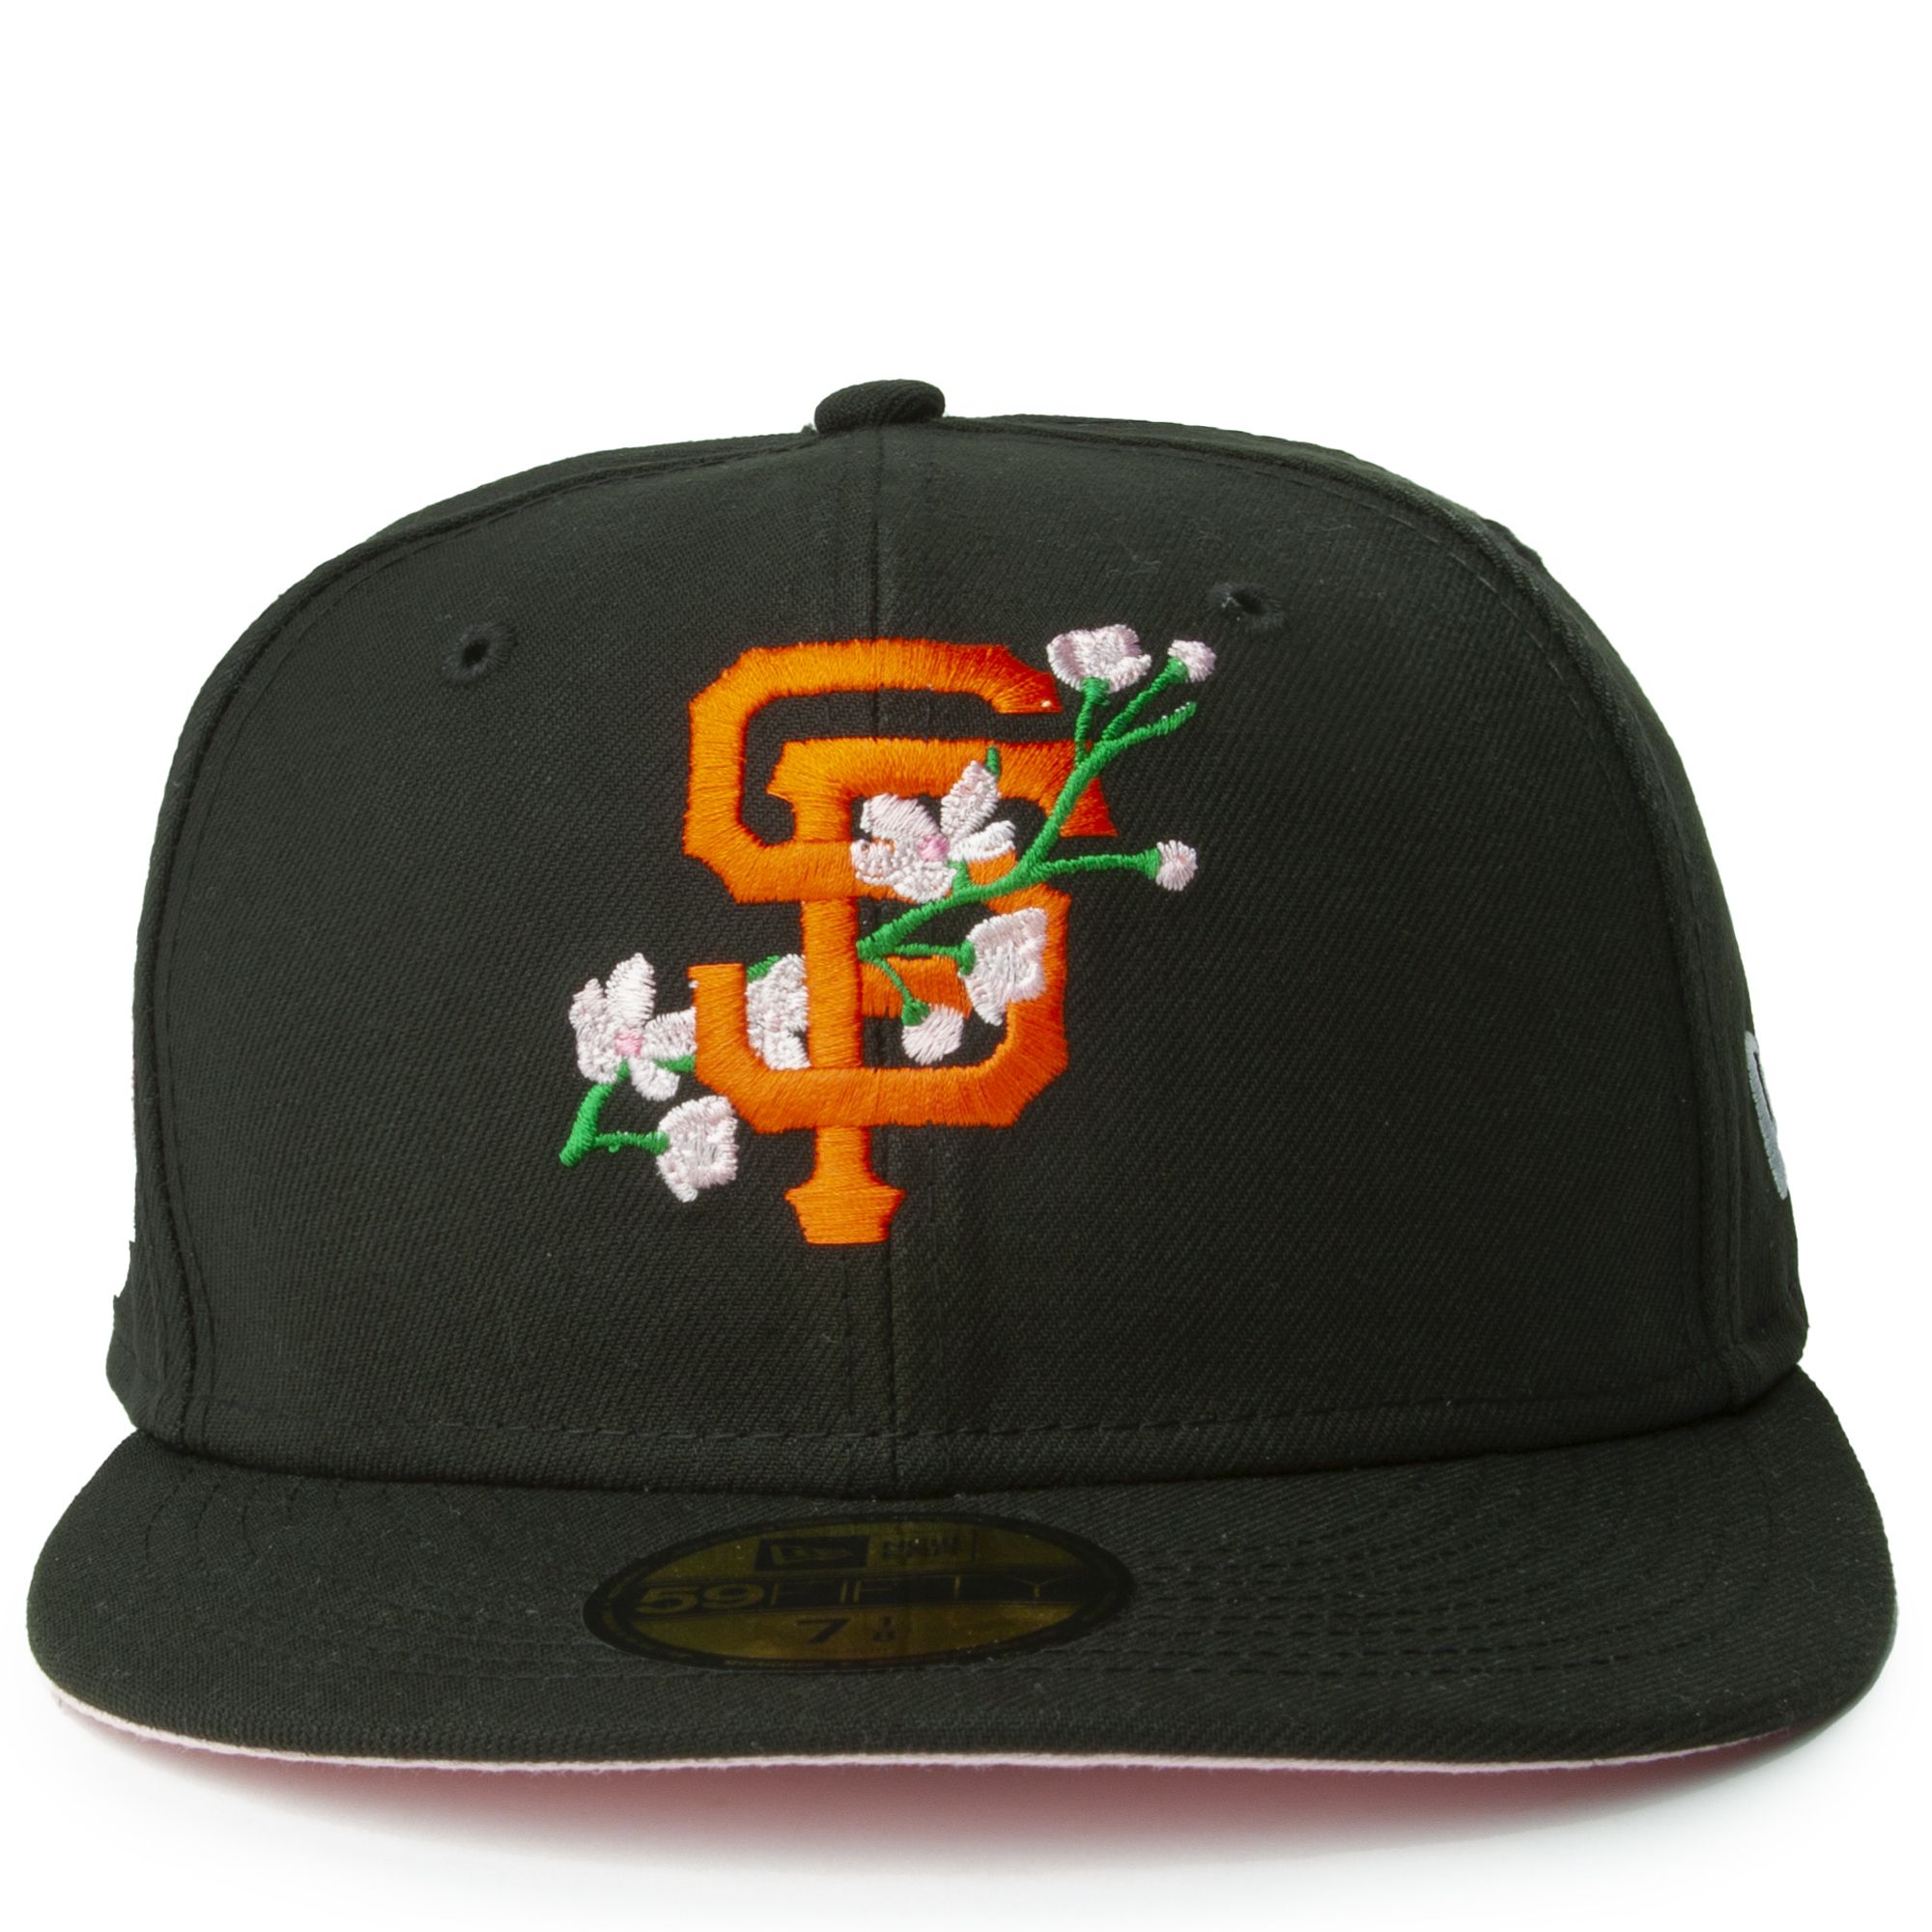 Men's New Era Red San Francisco Giants Sidepatch 59FIFTY Fitted Hat